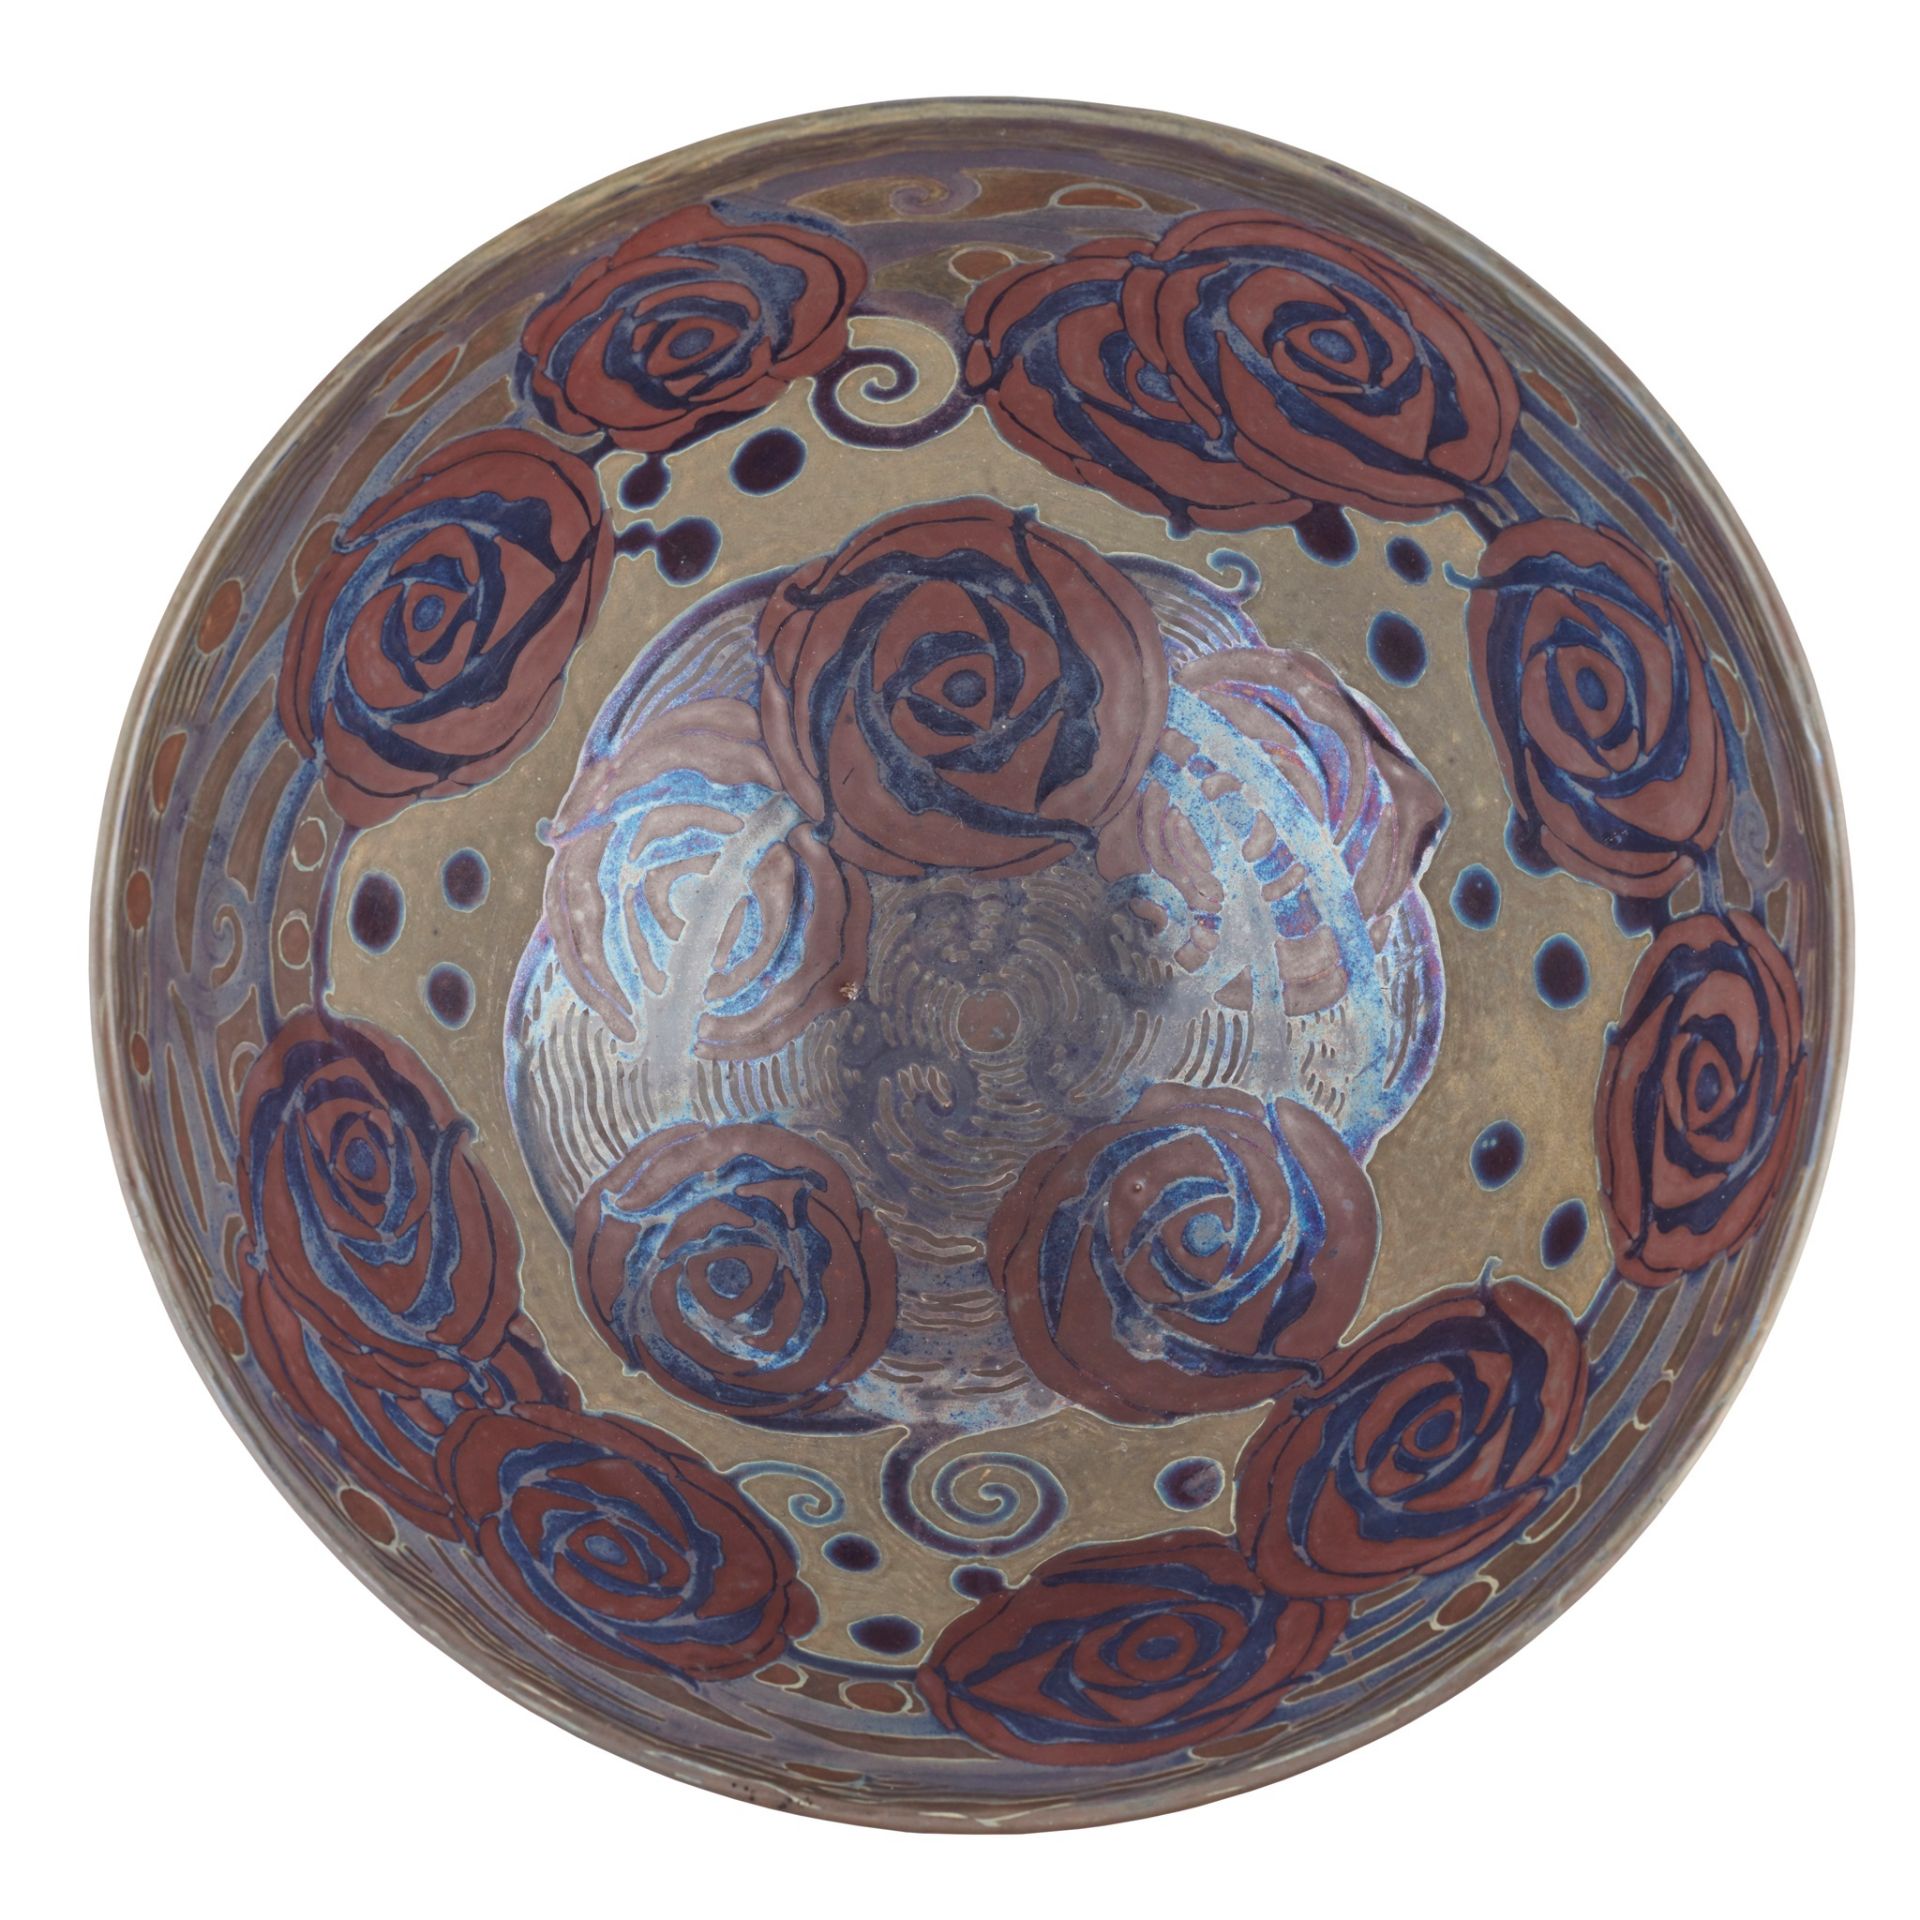 GALILEO CHINI (1873-1956) LARGE FOOTED LUSTRE BOWL, CIRCA 1920 - Image 2 of 2